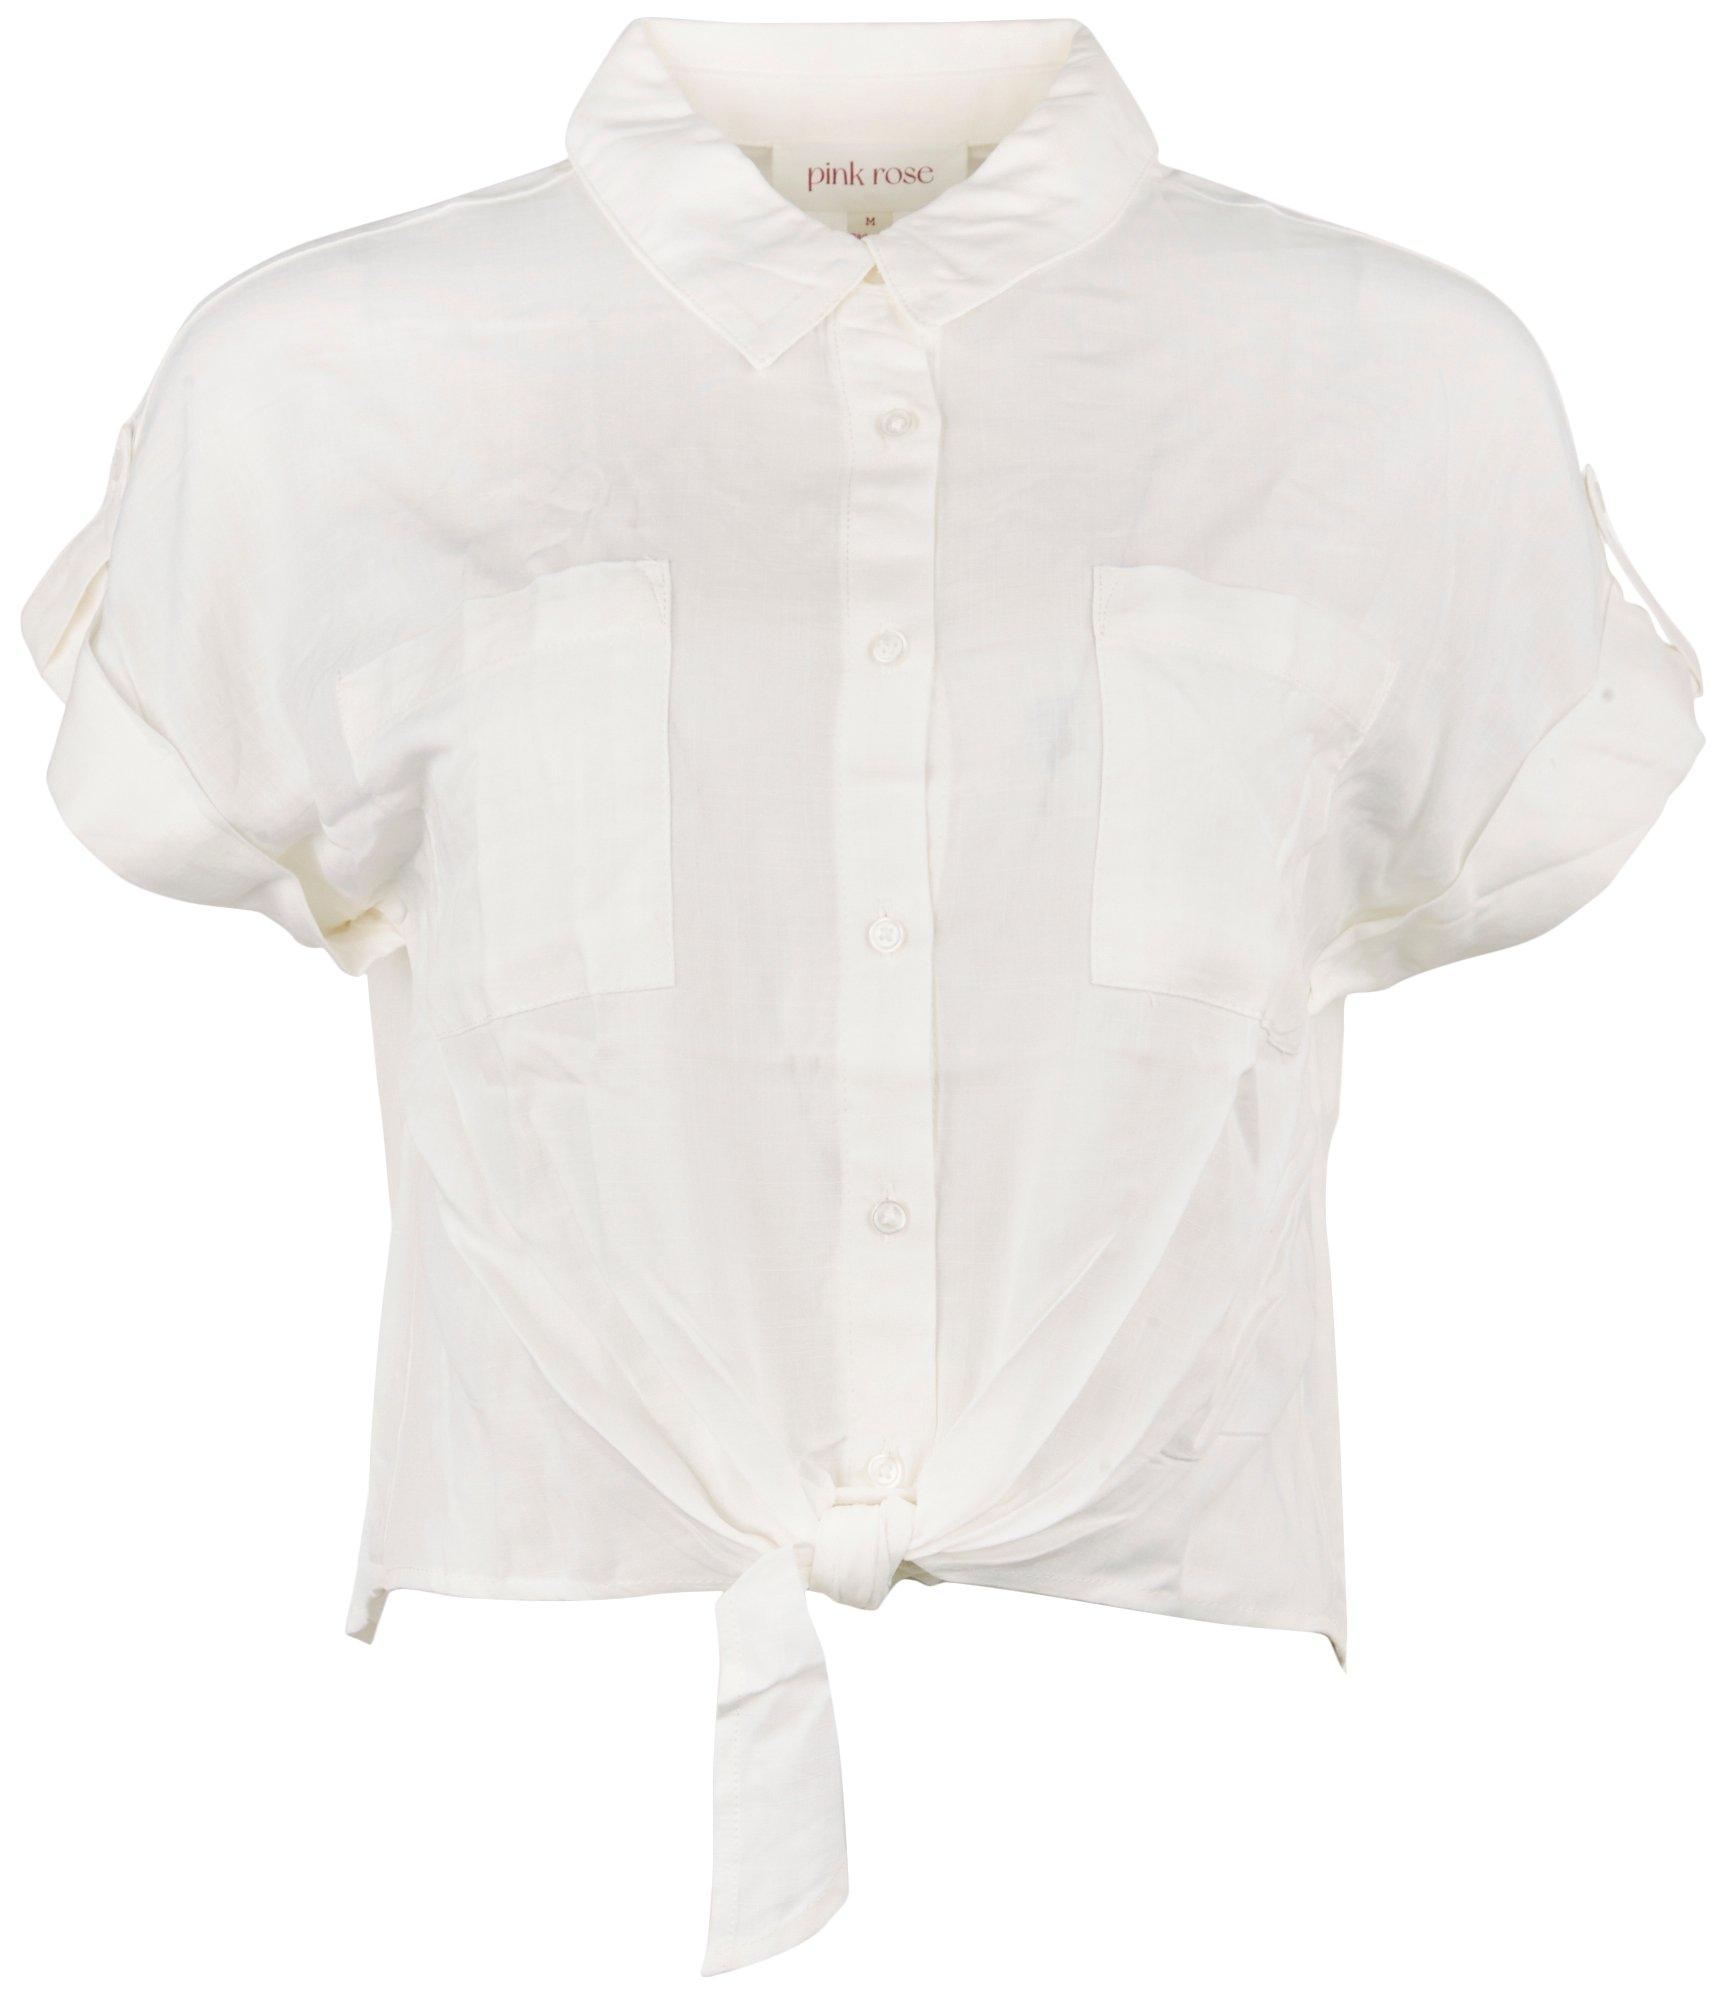 Juniors Solid Button Down Short Sleeve Top